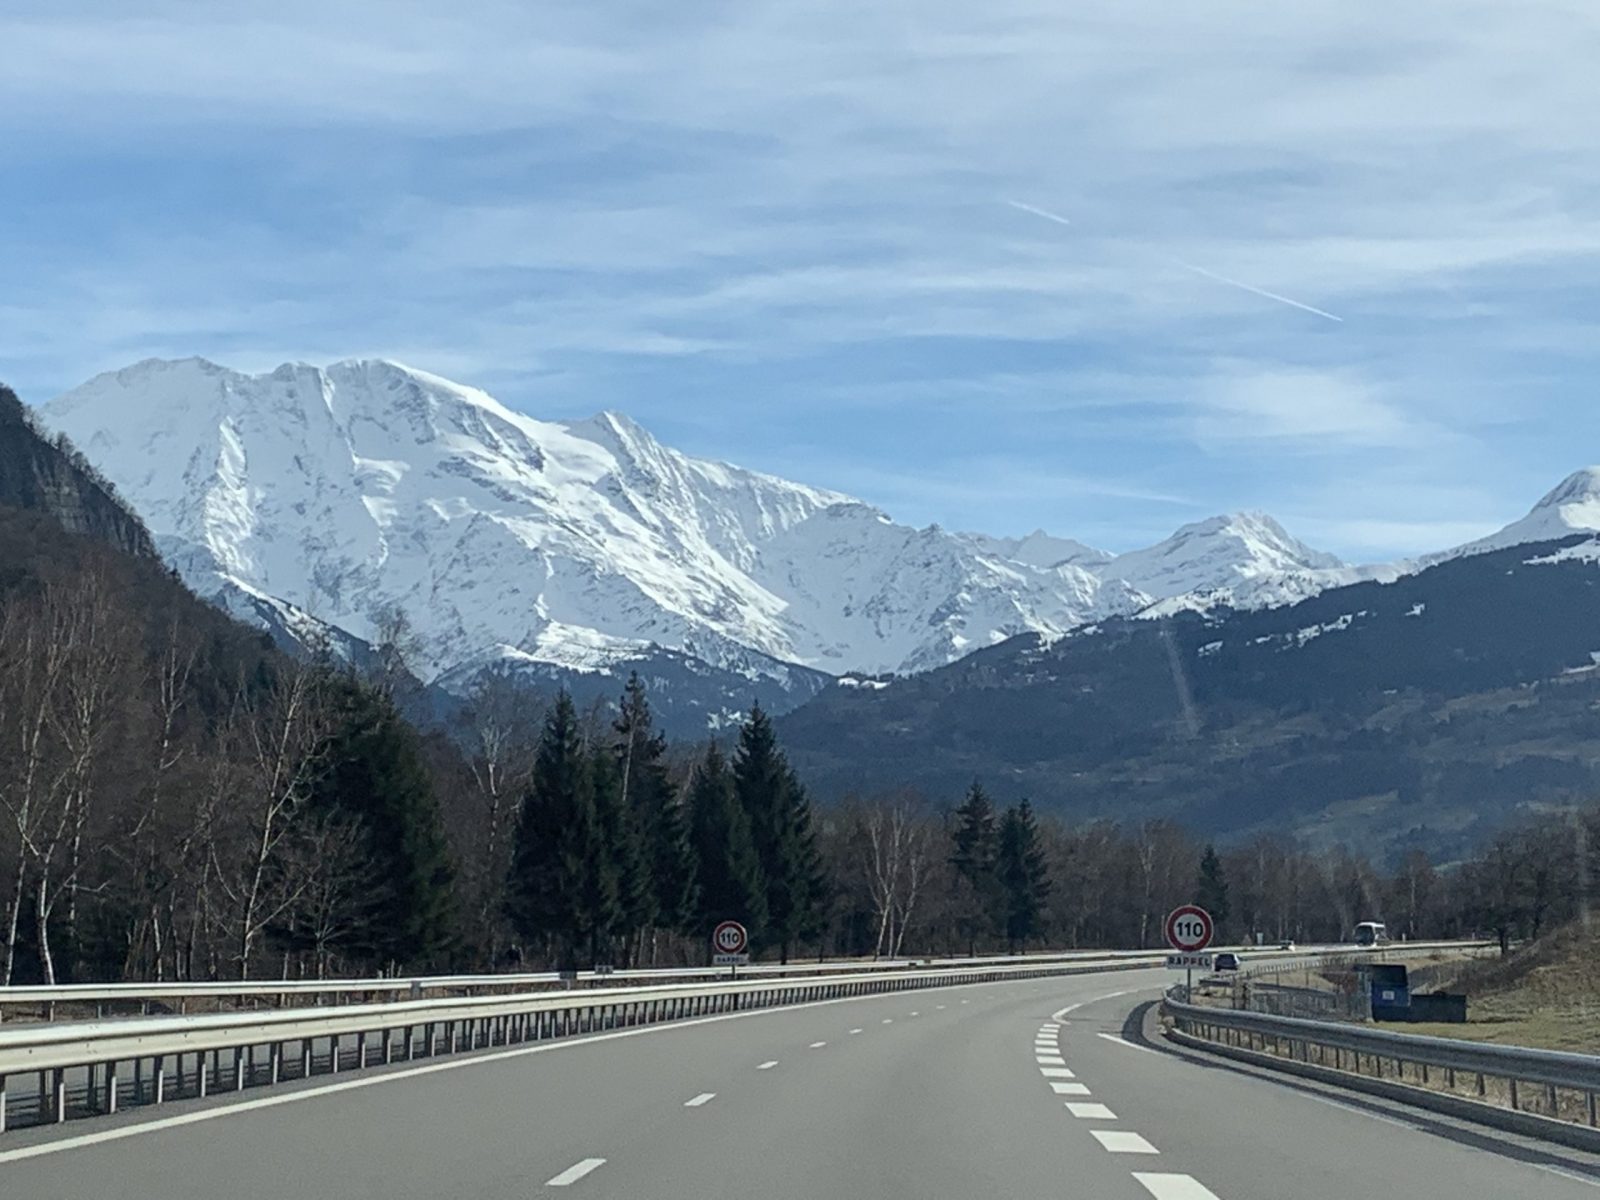 The best part of the road, Autoroute de Mont Blanc. Our half term ski-safari holiday based in the Valdigne of Aosta Valley- Courmayeur, Pila and La Thuile.